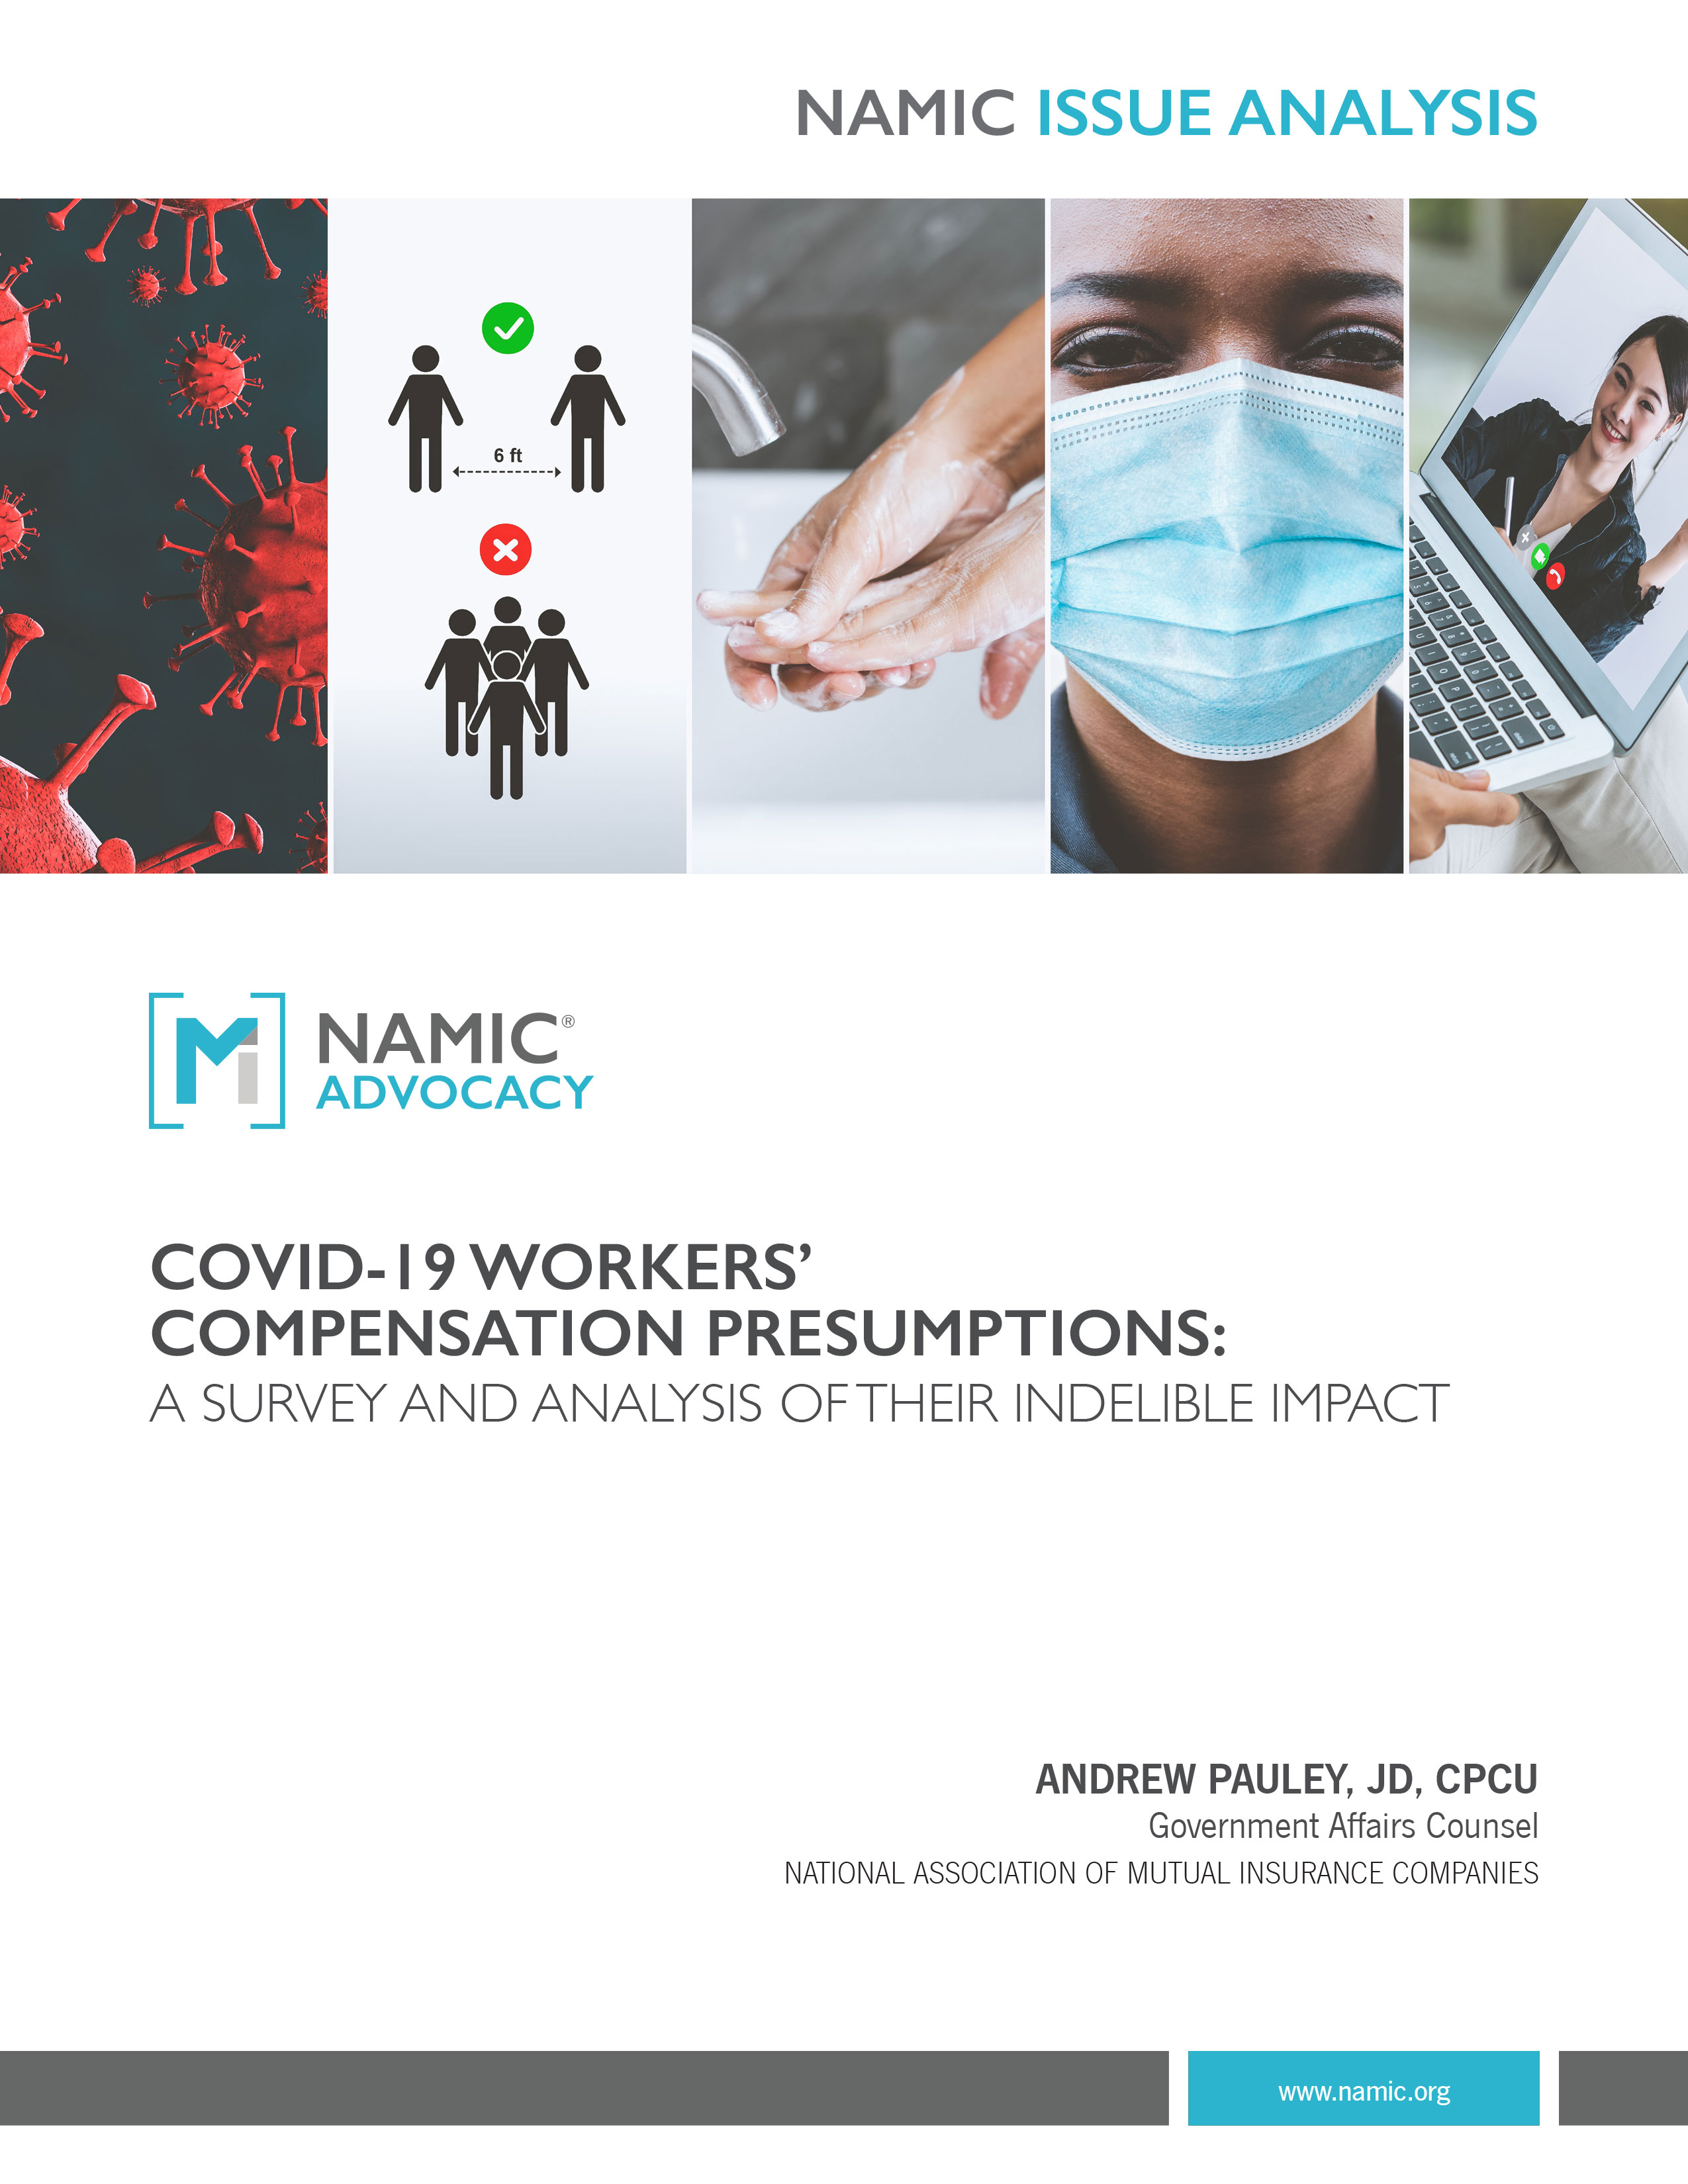 COVID-19 Workers' Compensation Presumptions: A Survey and Analysis of Their Indelible Impact PDF